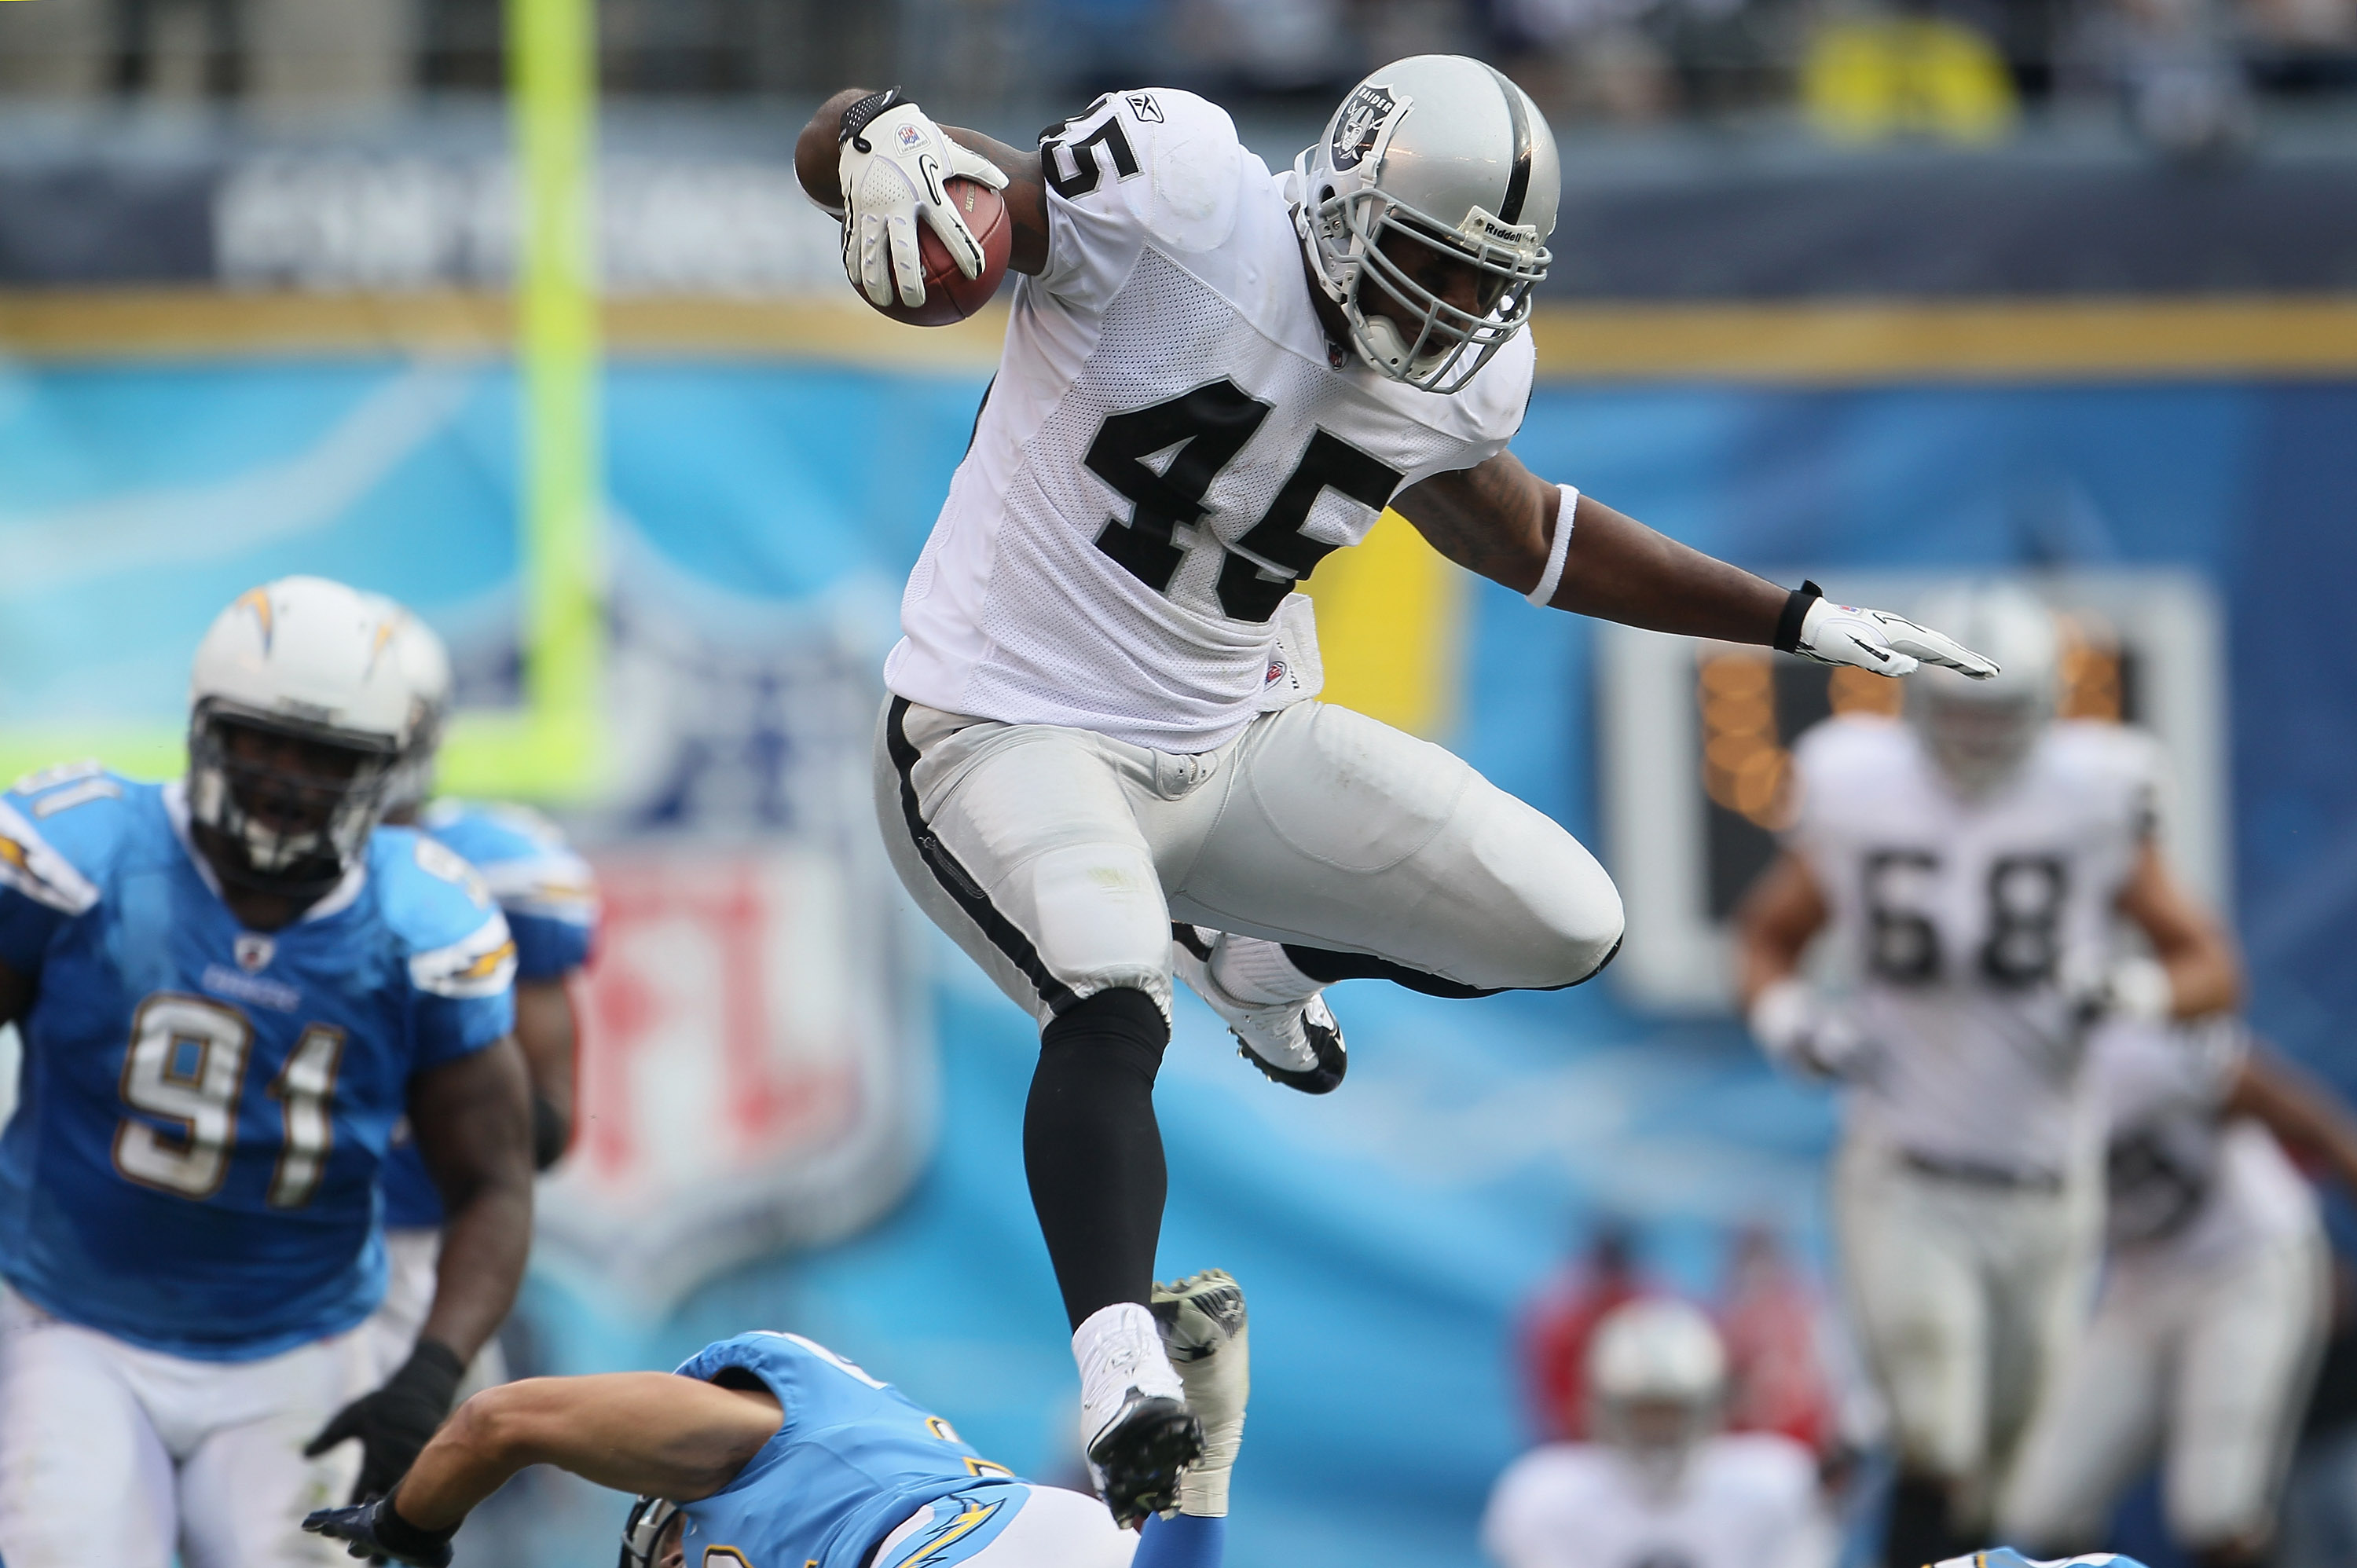 SAN DIEGO - DECEMBER 05:  Fullback Marcel Reece #45 of the Oakland Raiders leaps over Eric Weddle (not pictured) #32 of the San Diego Chargers in the second quarter at Qualcomm Stadium on December 5, 2010 in San Diego, California. The Raiders defeated the